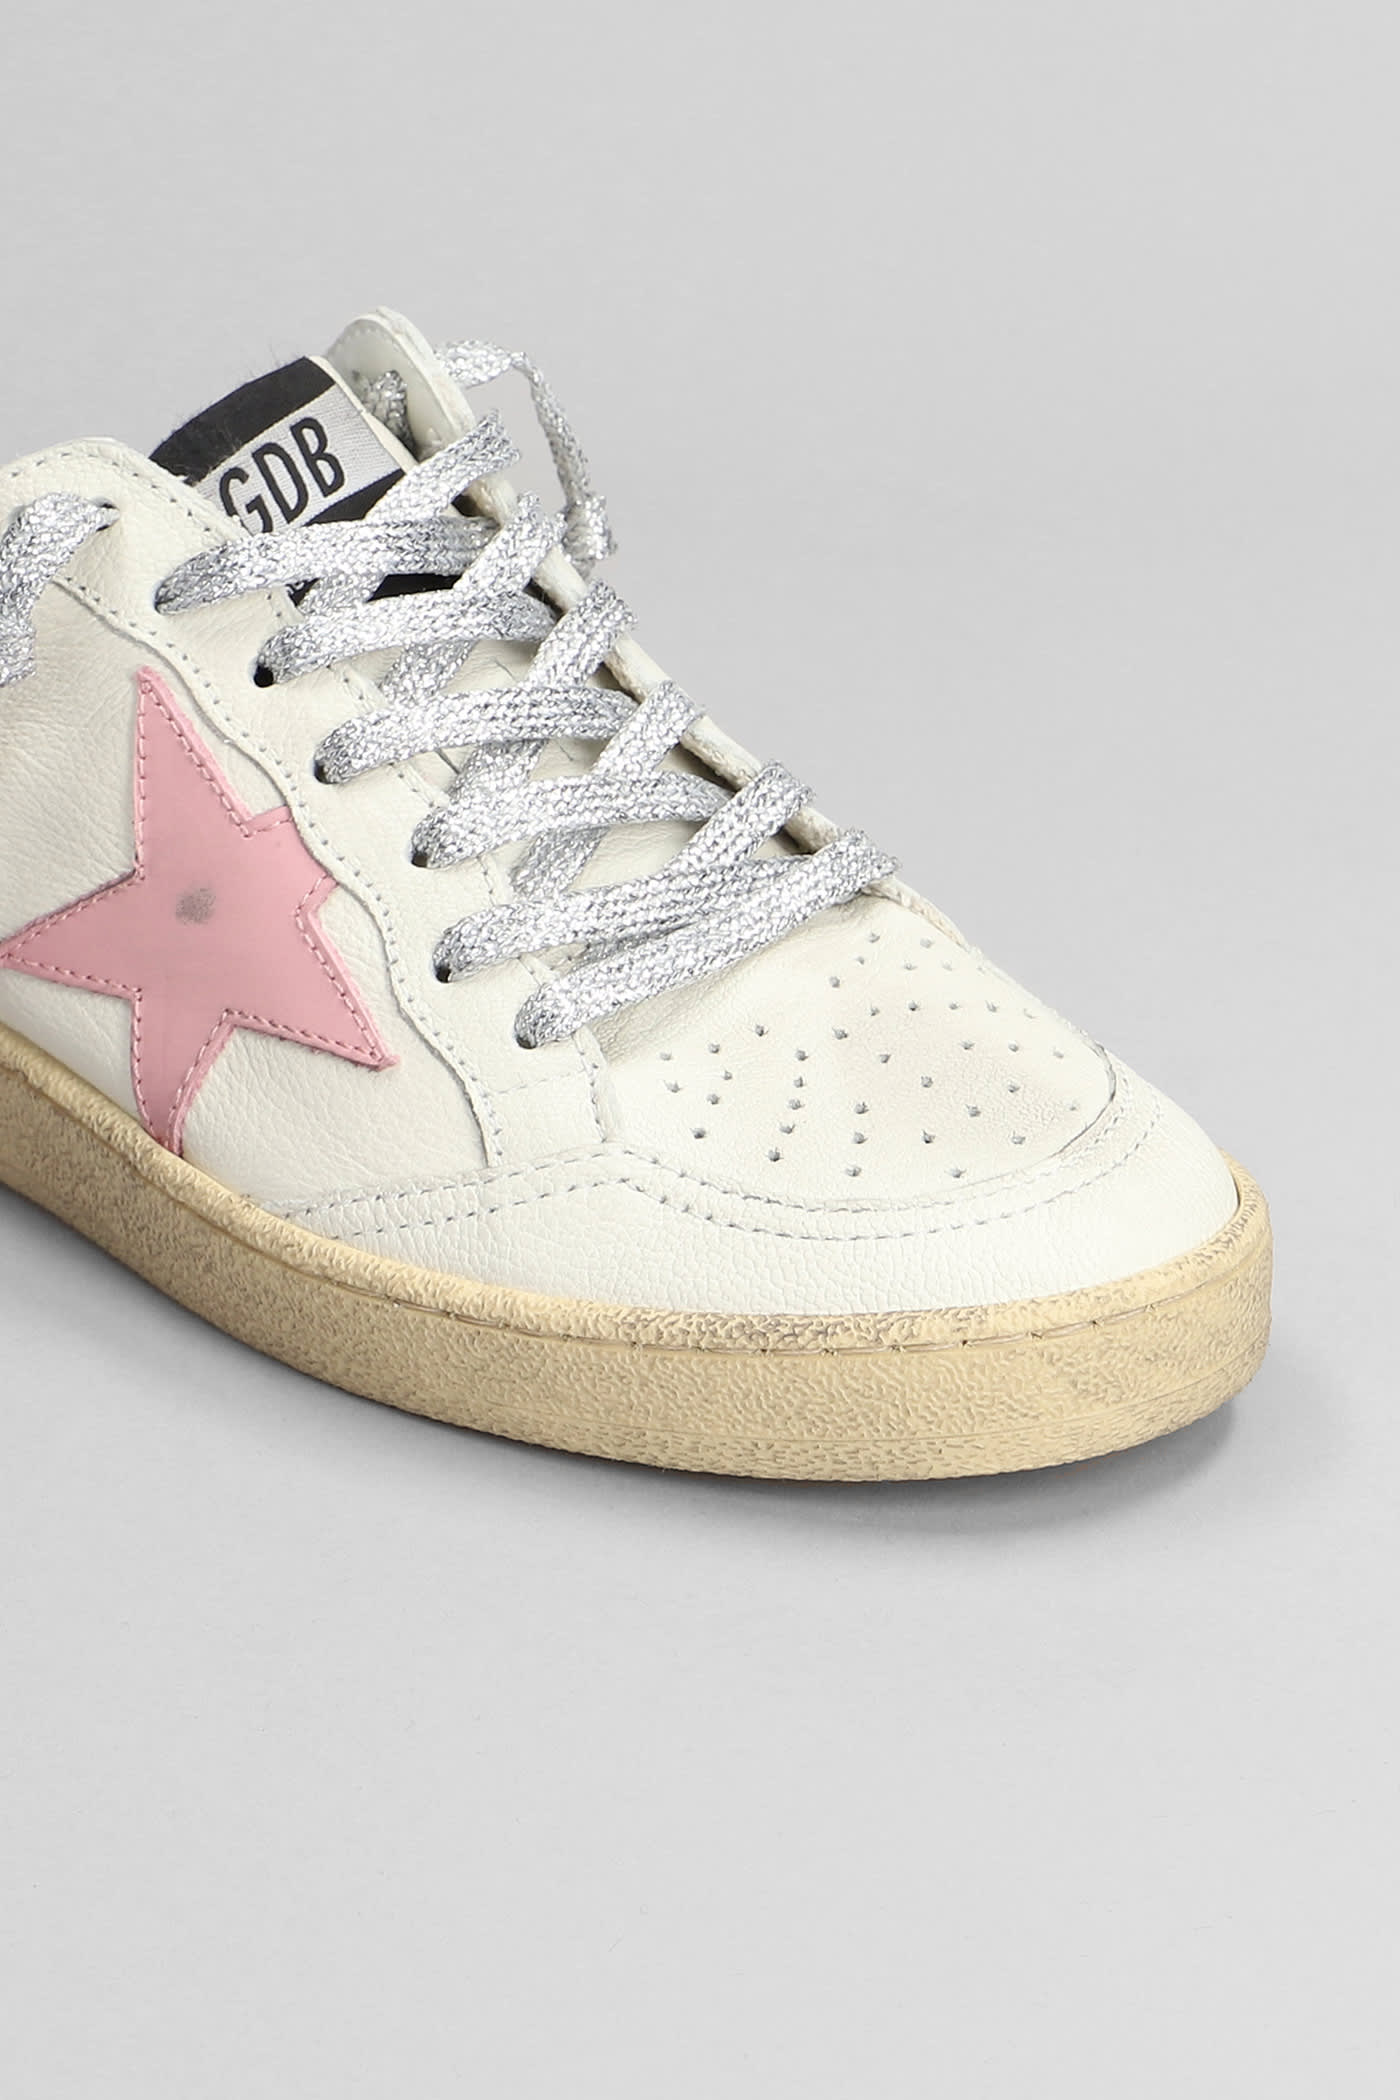 Shop Golden Goose Ball Star Sneakers In White Leather